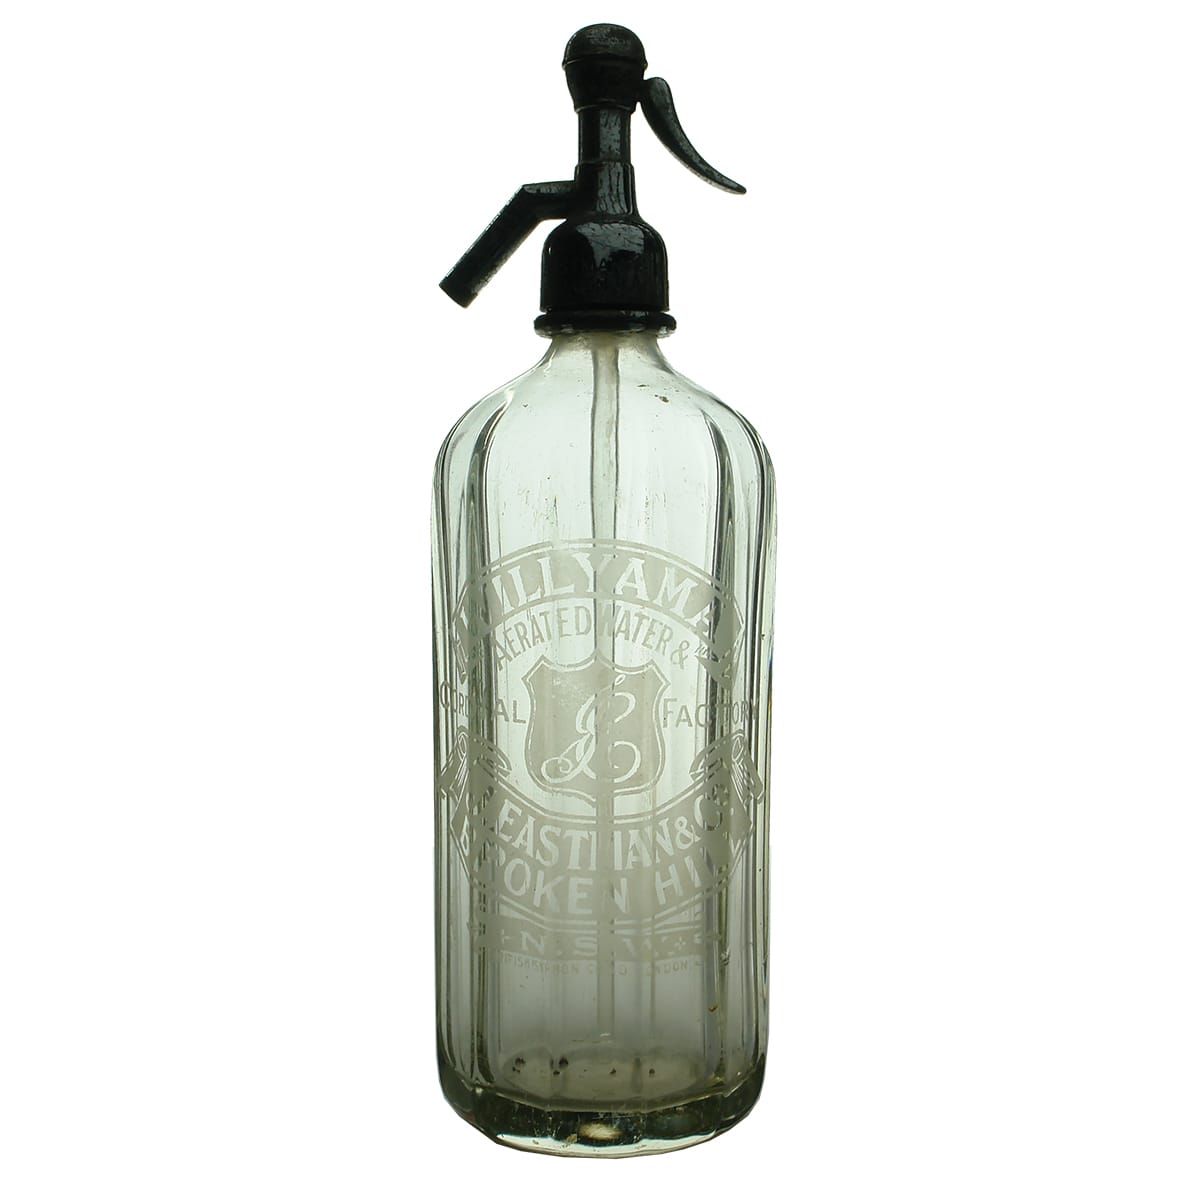 Soda Syphon. Willyama Aerated Water Factory. Eastman & Co., Broken Hill. Clear. 30 oz. (New South Wales)